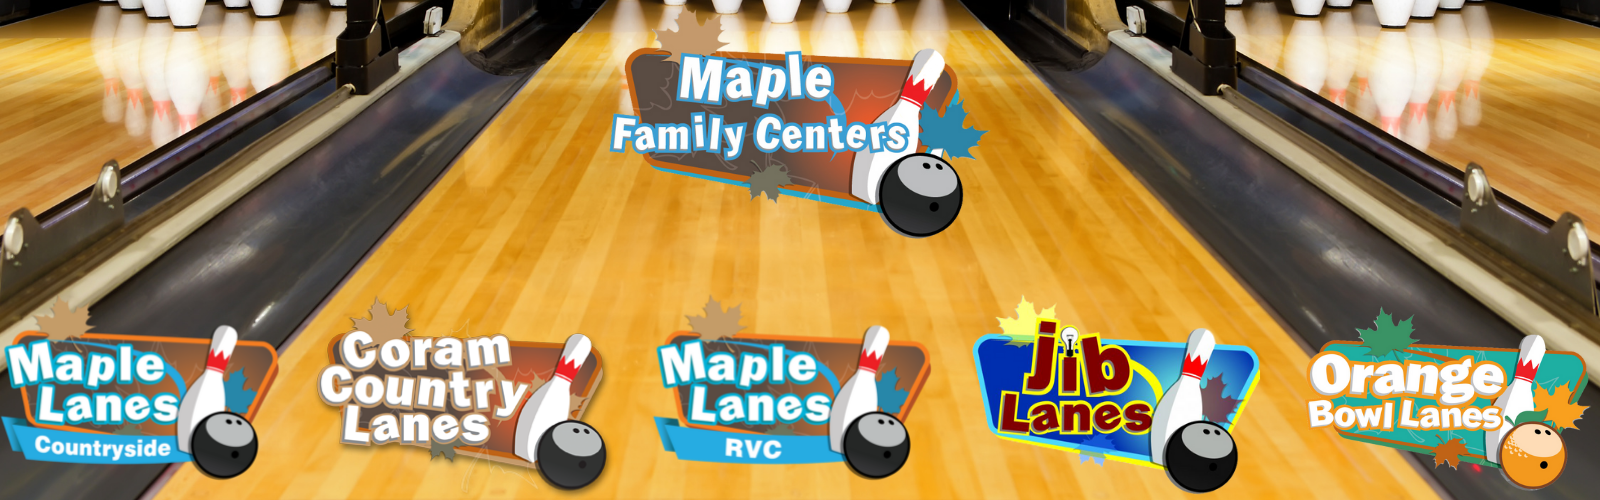 Maple Lanes_About_Header